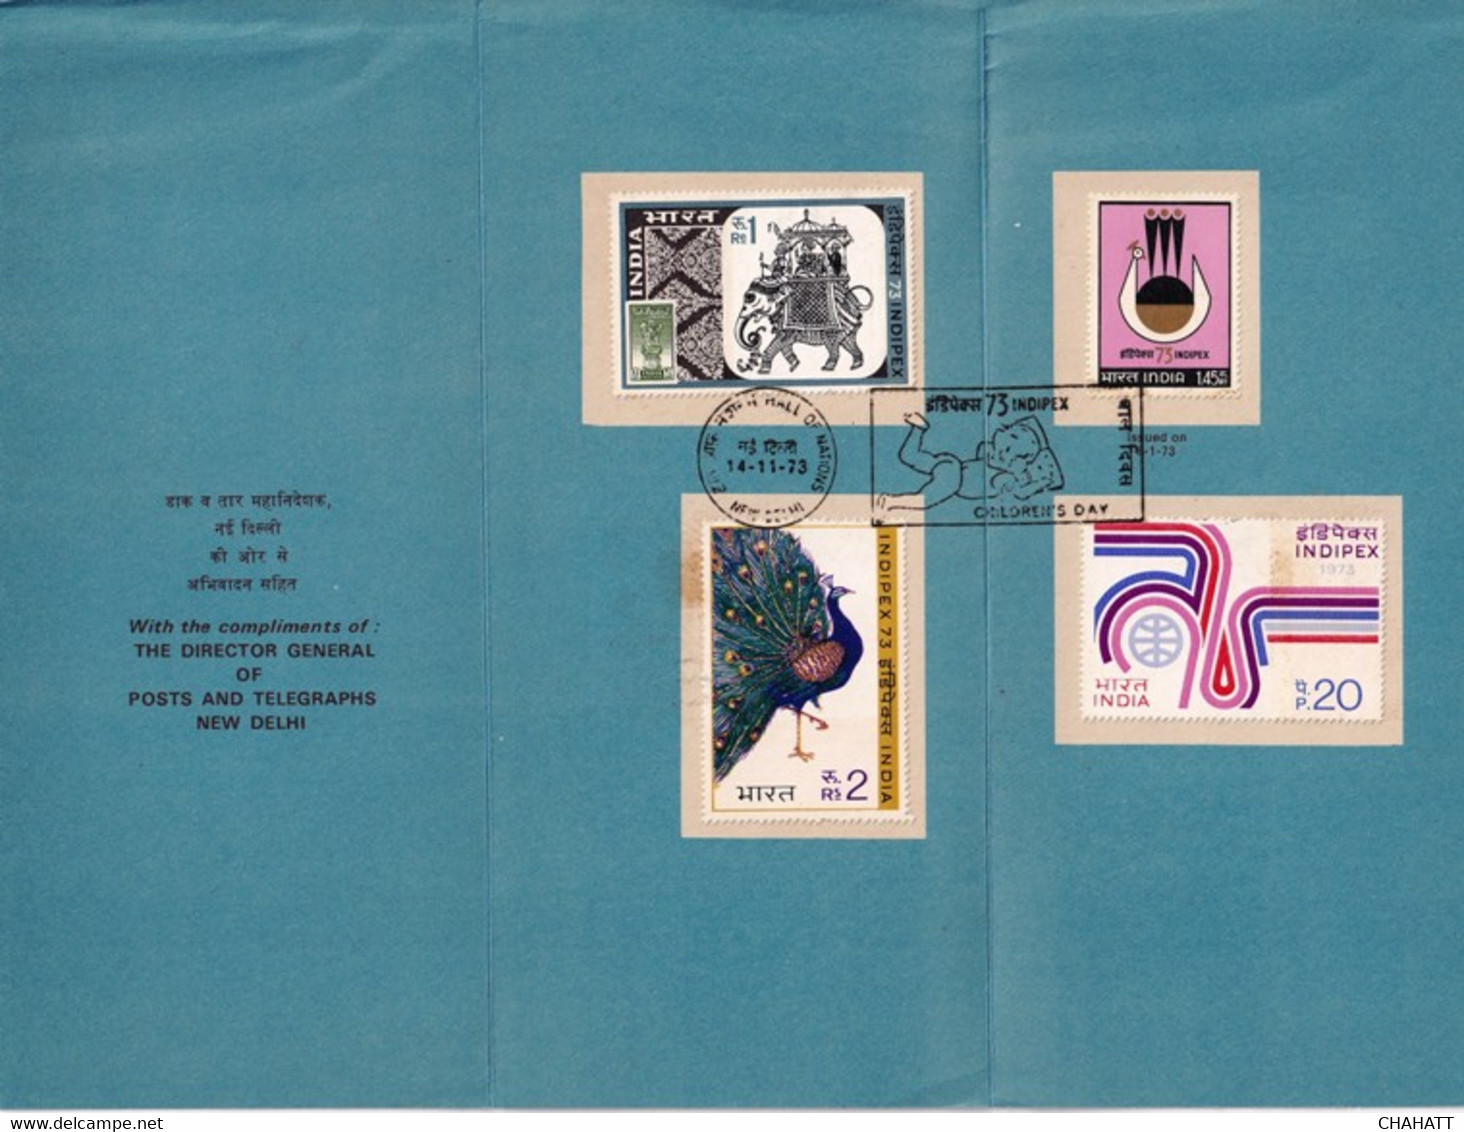 INDIPEX - 73 - PEACOCK AND OTHERS - FIRST DAY CANCEL- INFORMATION BROCHURE-SCARCE-BX2-38 - Collections, Lots & Séries